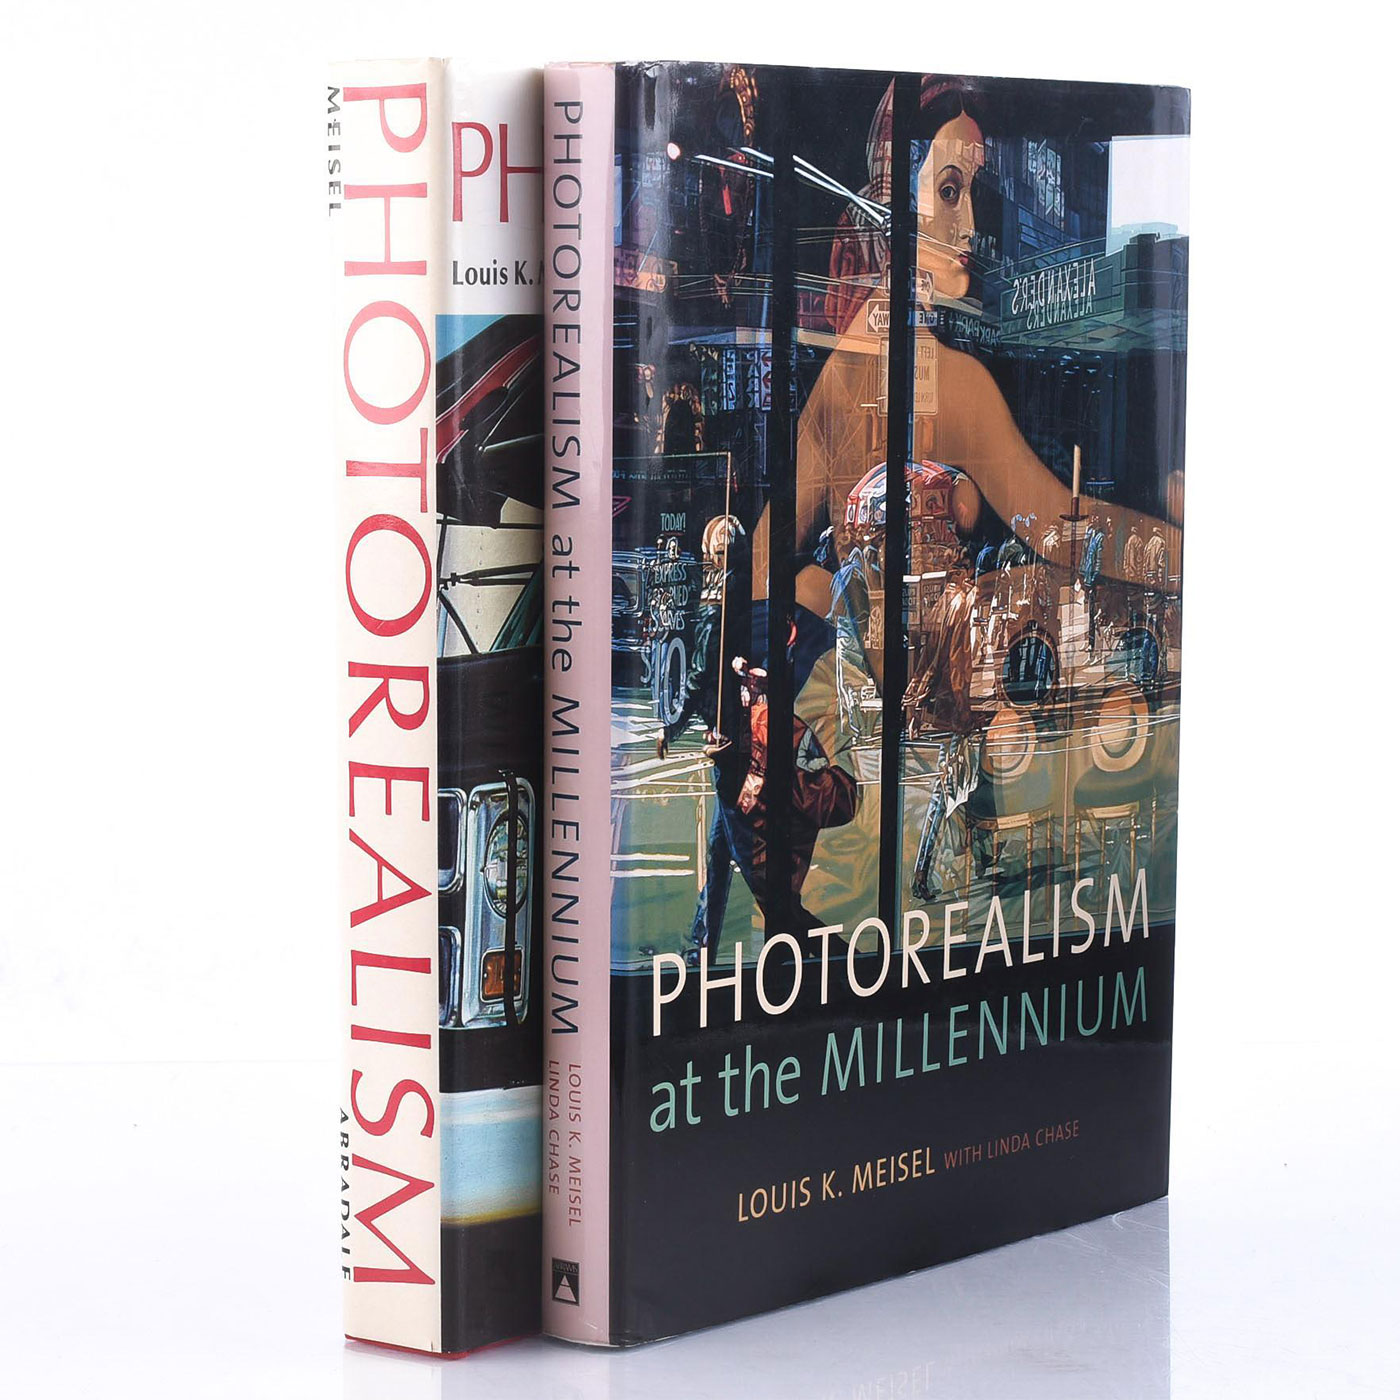 2 PHOTOREALISM ART BOOKS BY LOUIS K. MEISEL | Lion and Unicorn